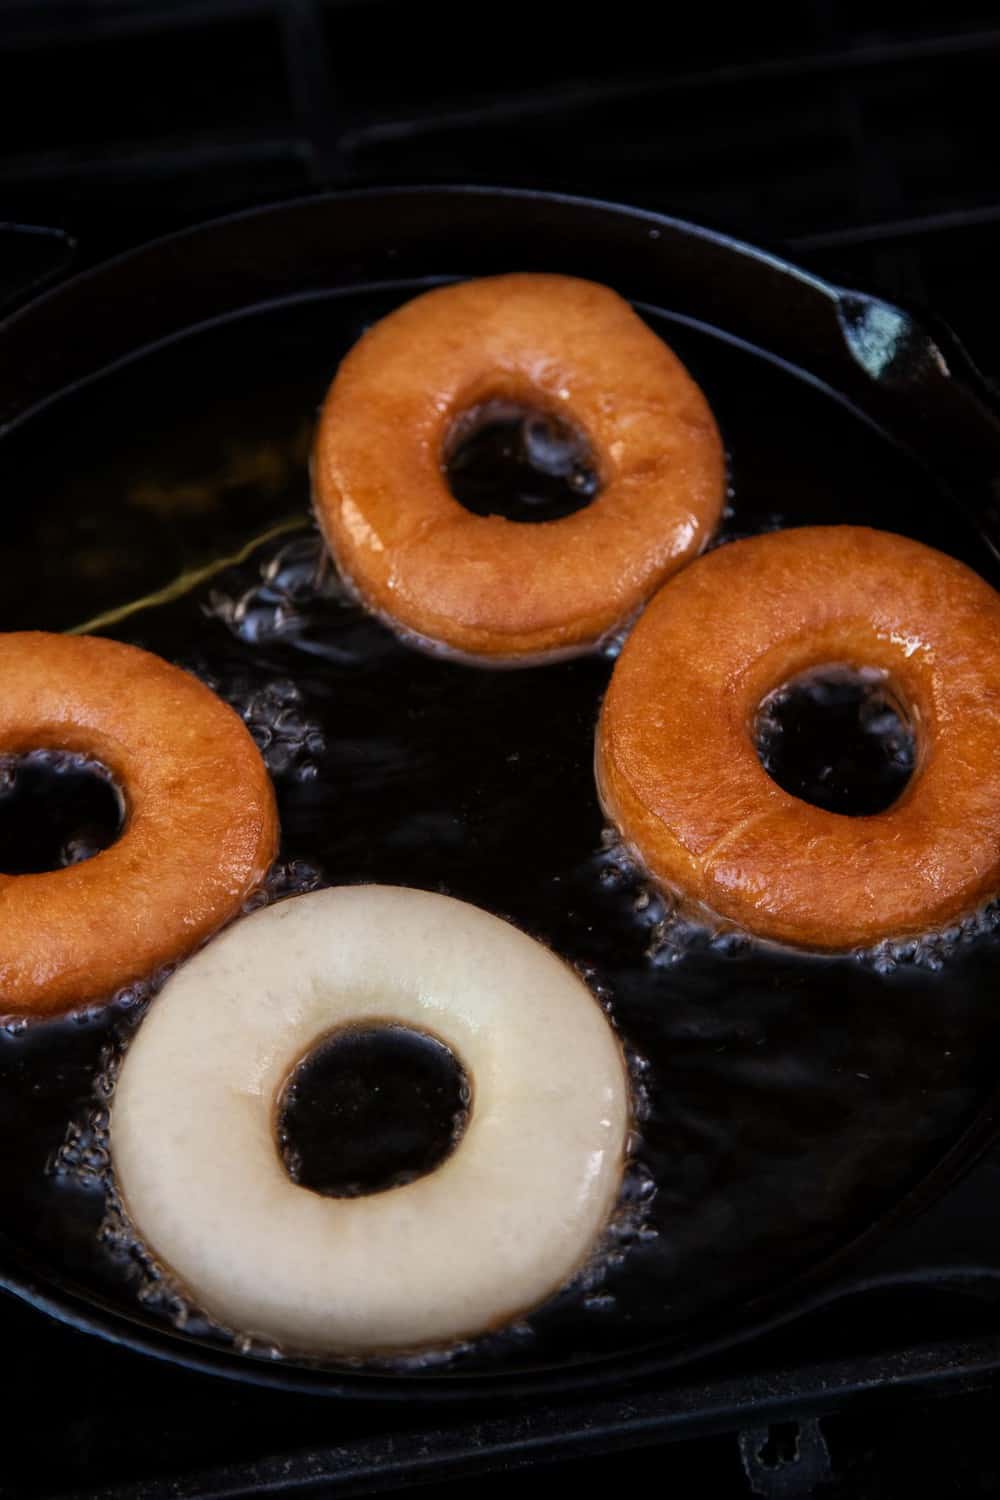 Frying donuts in a cast iron pan